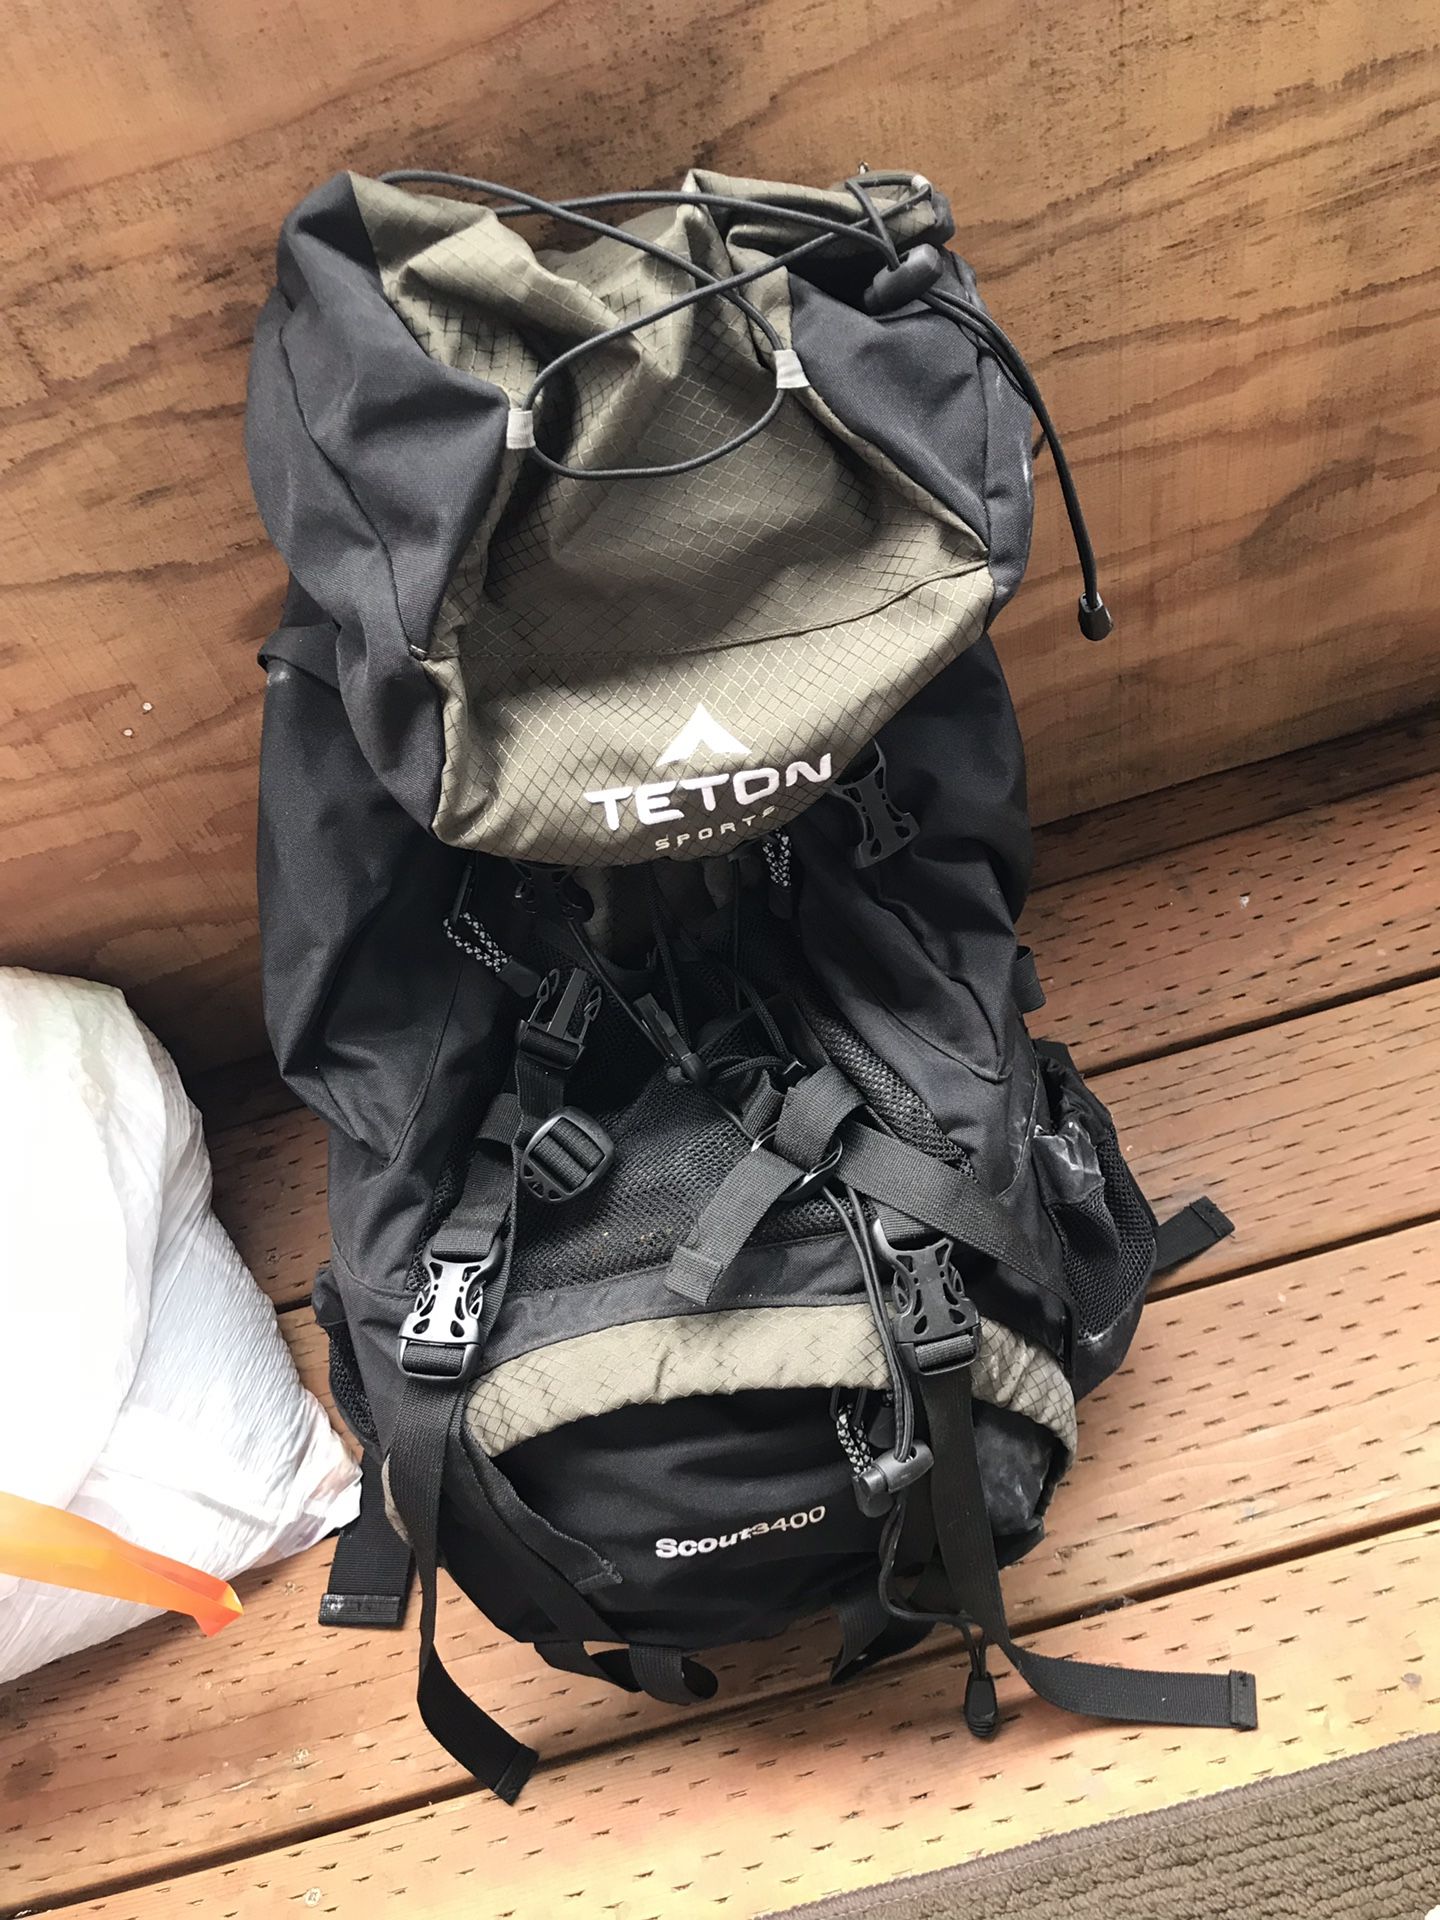 Hiking bag/backpack for sale. Good condition 55L